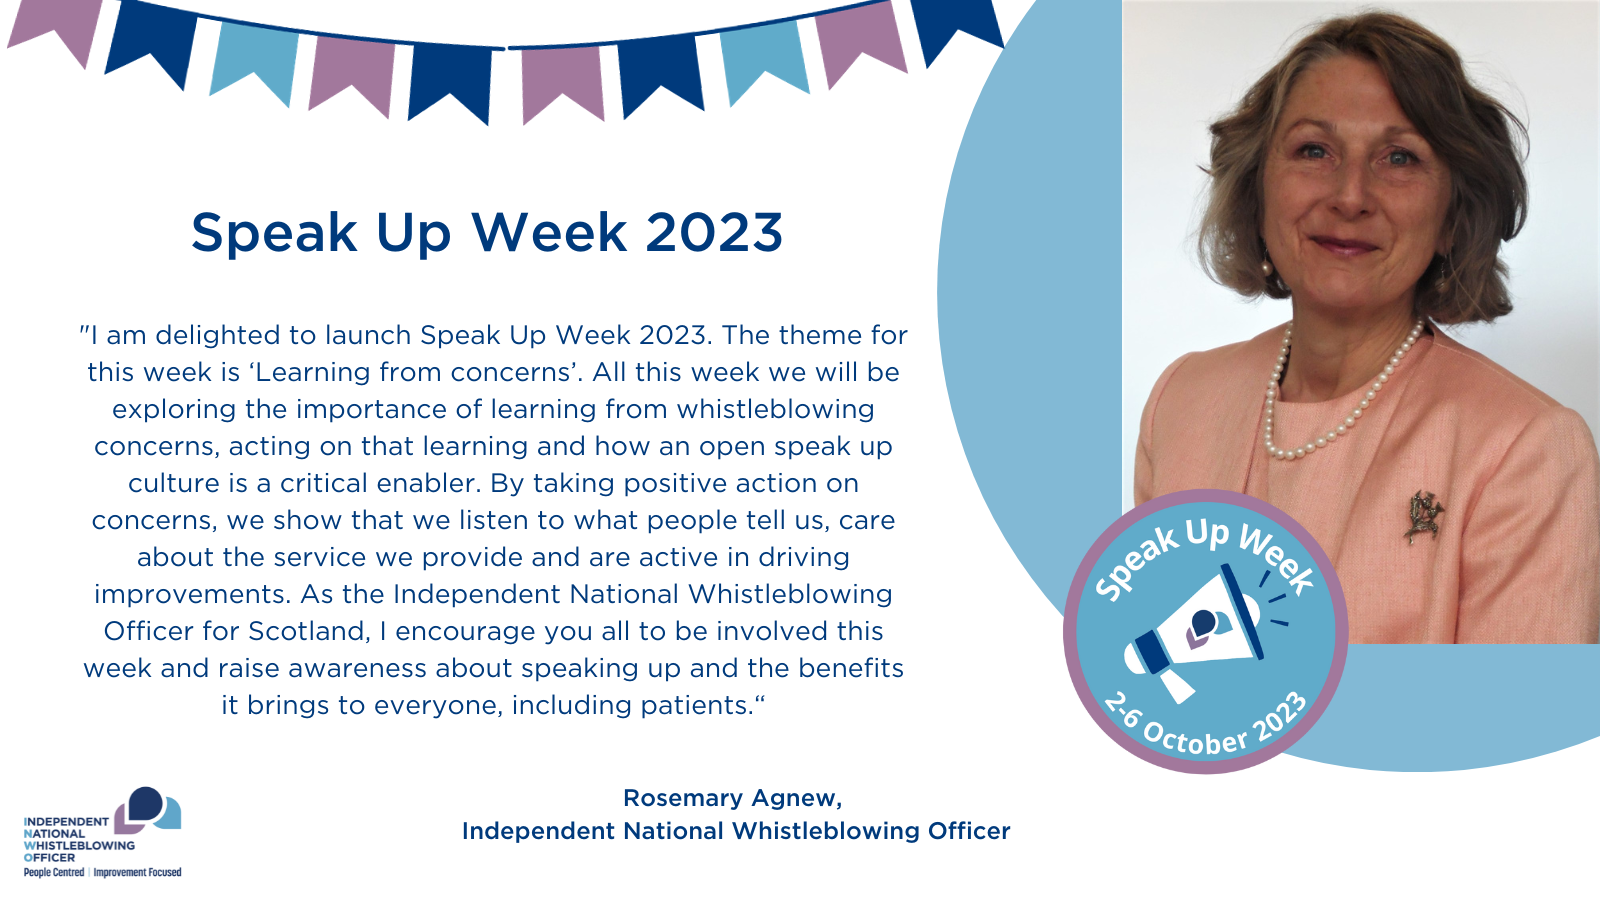 A statement from the INWO, Rosemary Agnew: "I am delighted to launch Speak Up Week 2023. The theme for this week is ‘Learning from concerns’ All this week we will be exploring the importance of learning from whistleblowing concerns, acting on that learning and how an open speak up culture is a critical enabler. By taking positive action on concerns, we show that we listen to what people tell us, care about the service we provide and are active in driving improvements. As the Independent National Whistleblowing Officer for Scotland, I encourage you all to be involved this week and raise awareness about speaking up and the benefits it brings to everyone, including patients."